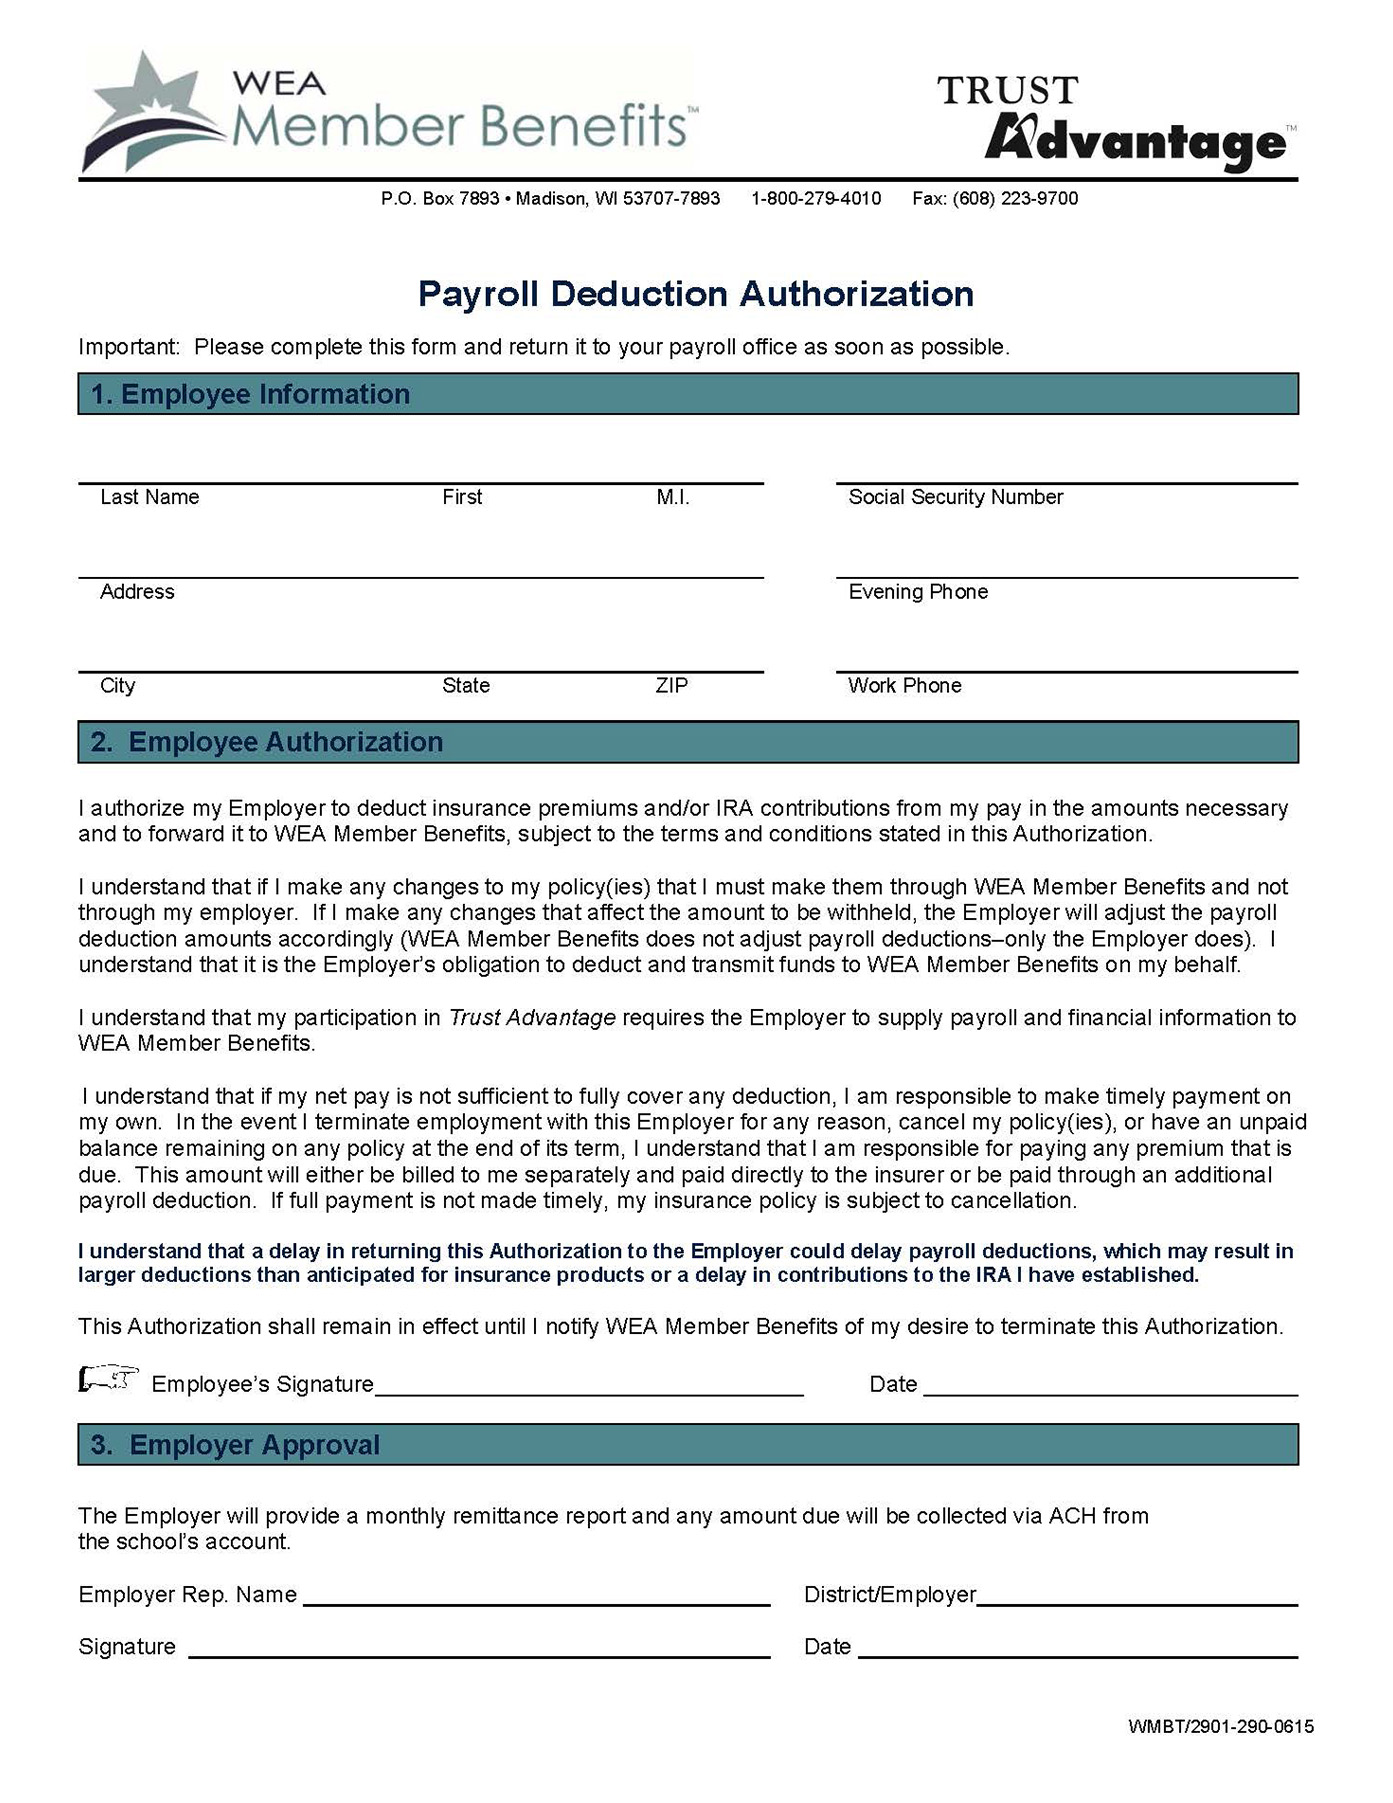 Click to download Payroll Deduction Authorization Form